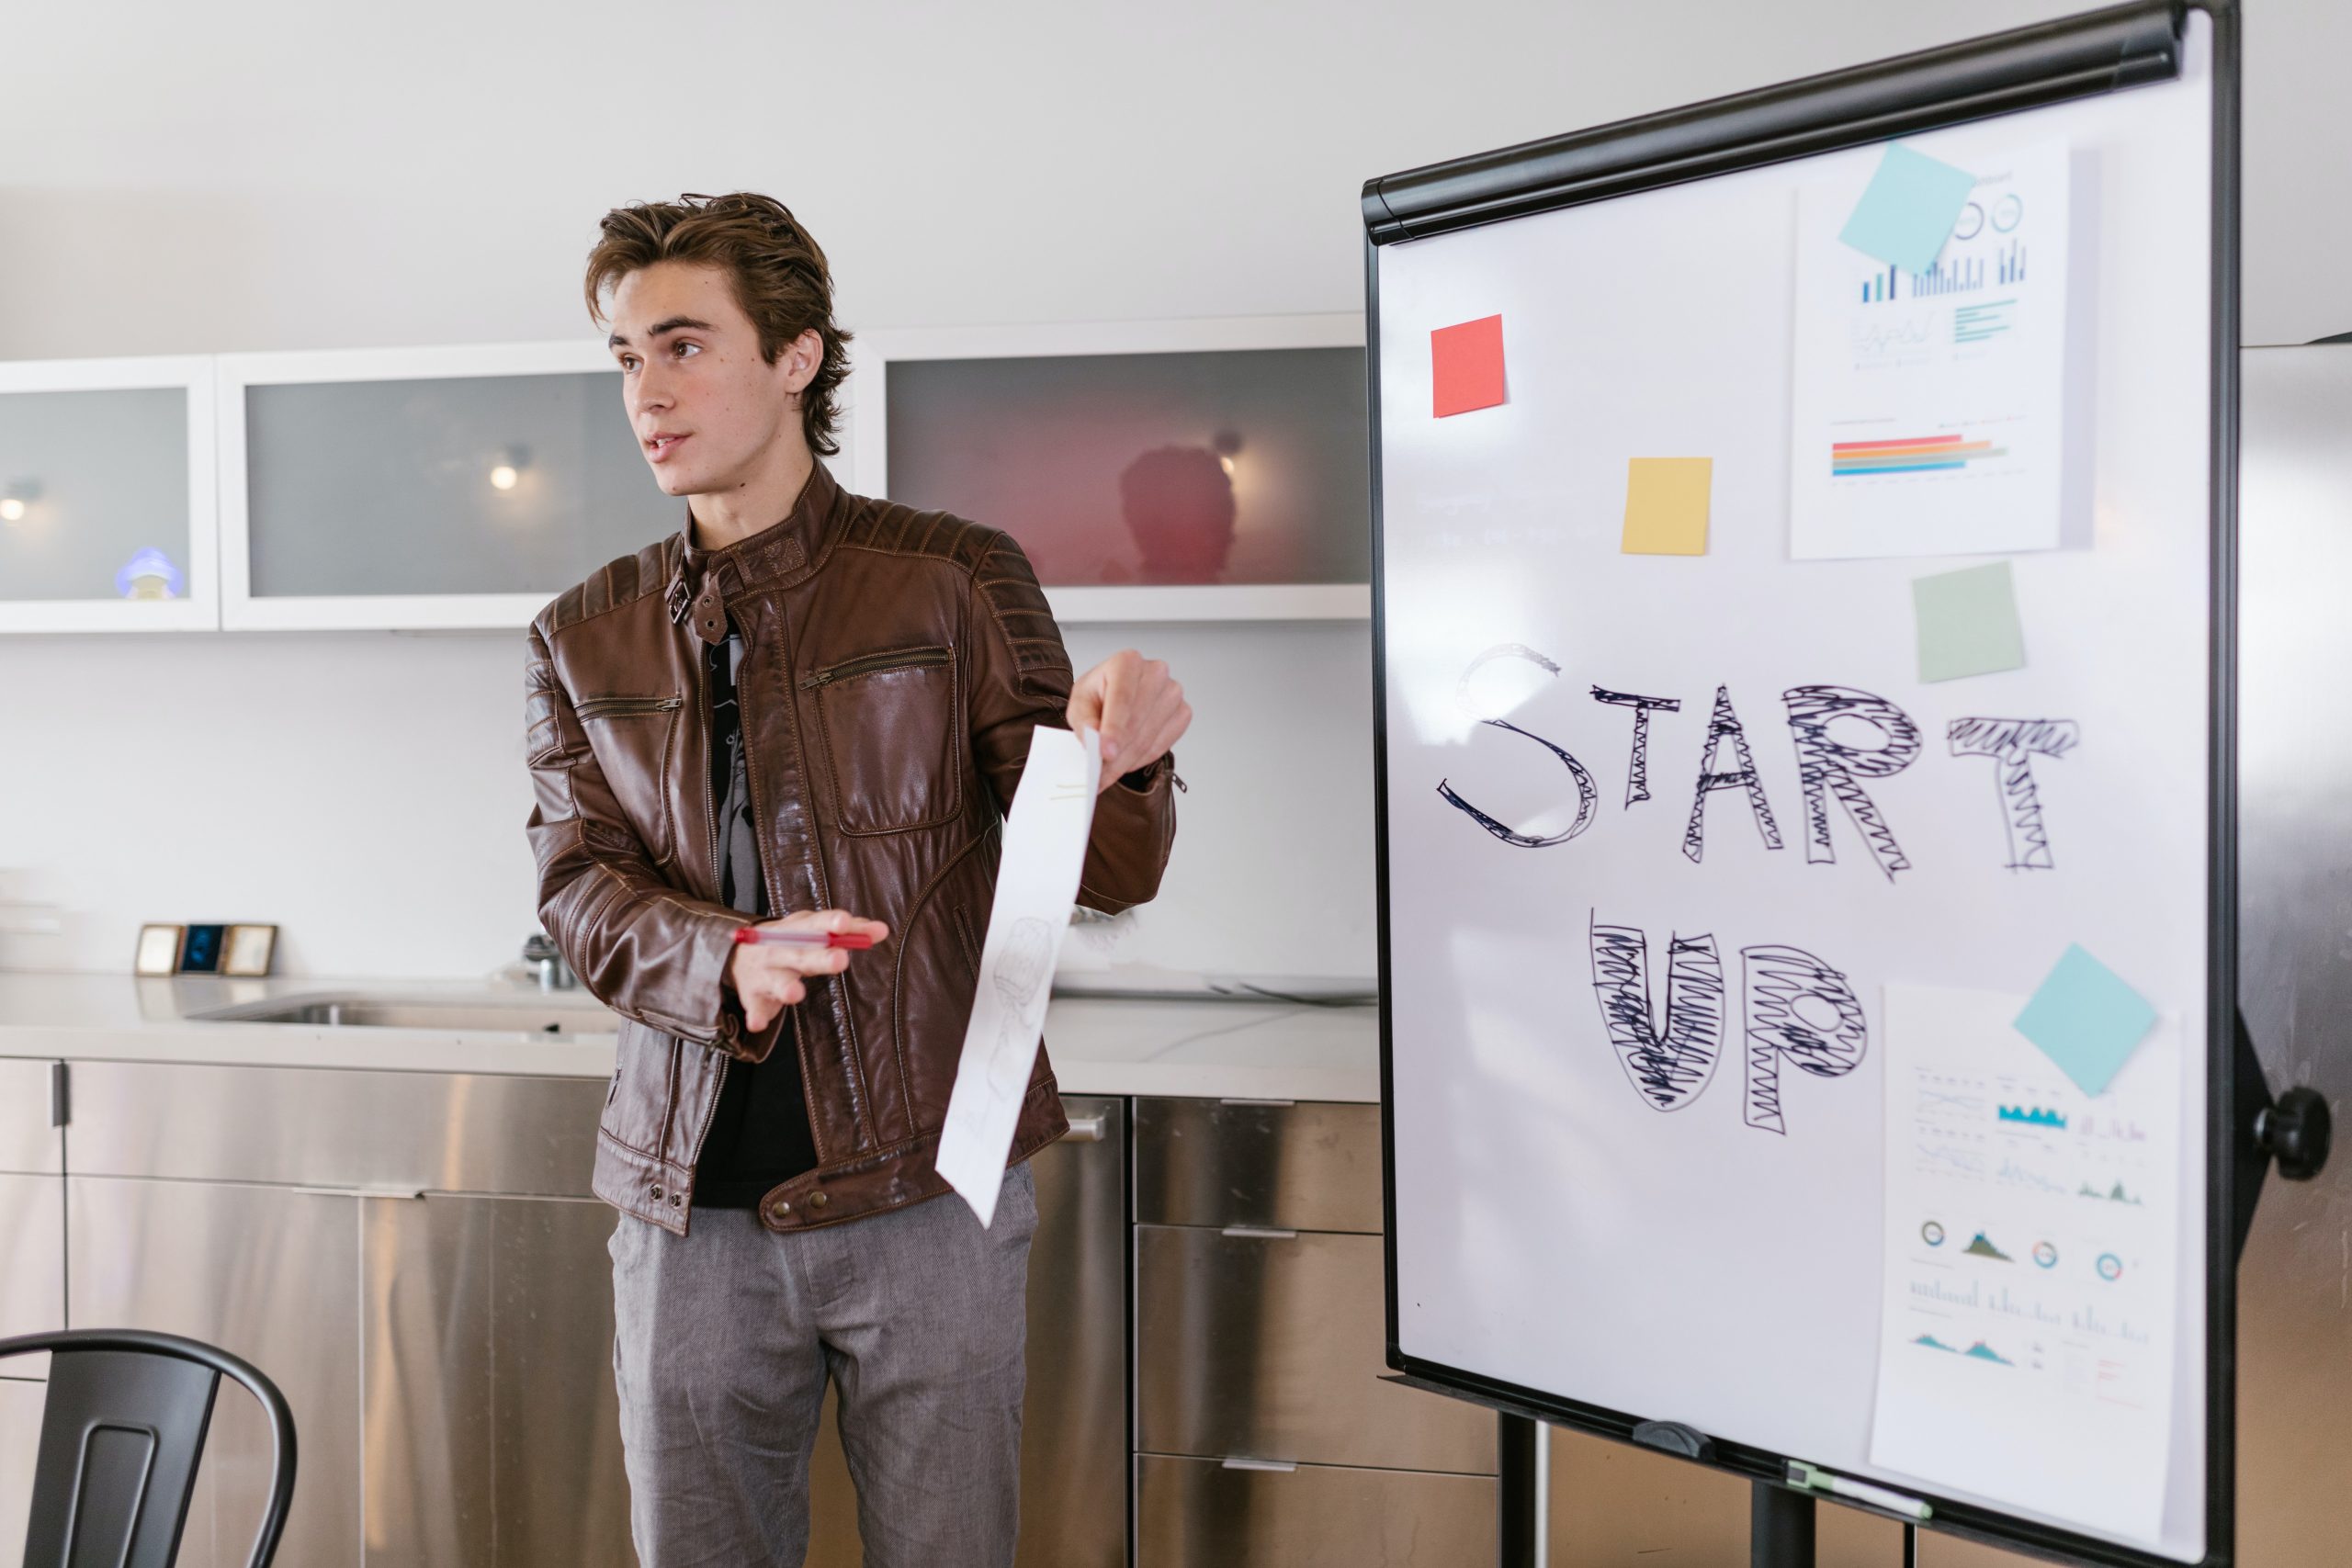 Image shows a young man at a white board holding some paper and explaining his crowdfunding project to an audience. The whiteboard reads "Start Up".